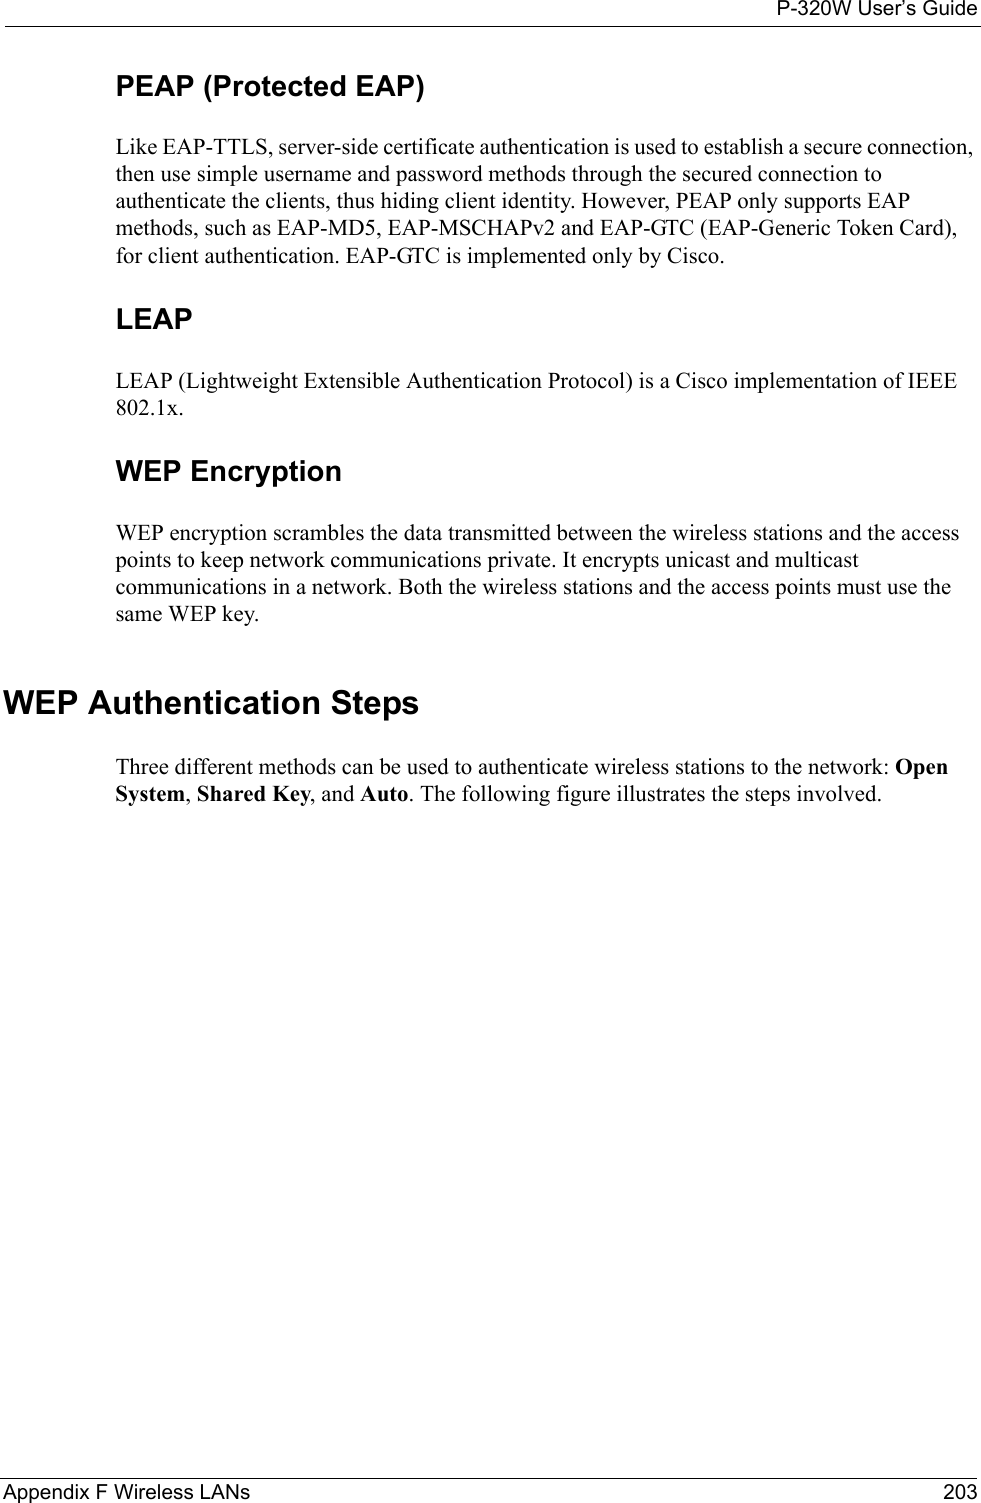 P-320W User’s GuideAppendix F Wireless LANs 203PEAP (Protected EAP)   Like EAP-TTLS, server-side certificate authentication is used to establish a secure connection, then use simple username and password methods through the secured connection to authenticate the clients, thus hiding client identity. However, PEAP only supports EAP methods, such as EAP-MD5, EAP-MSCHAPv2 and EAP-GTC (EAP-Generic Token Card), for client authentication. EAP-GTC is implemented only by Cisco.LEAPLEAP (Lightweight Extensible Authentication Protocol) is a Cisco implementation of IEEE 802.1x. WEP EncryptionWEP encryption scrambles the data transmitted between the wireless stations and the access points to keep network communications private. It encrypts unicast and multicast communications in a network. Both the wireless stations and the access points must use the same WEP key. WEP Authentication StepsThree different methods can be used to authenticate wireless stations to the network: Open System, Shared Key, and Auto. The following figure illustrates the steps involved.